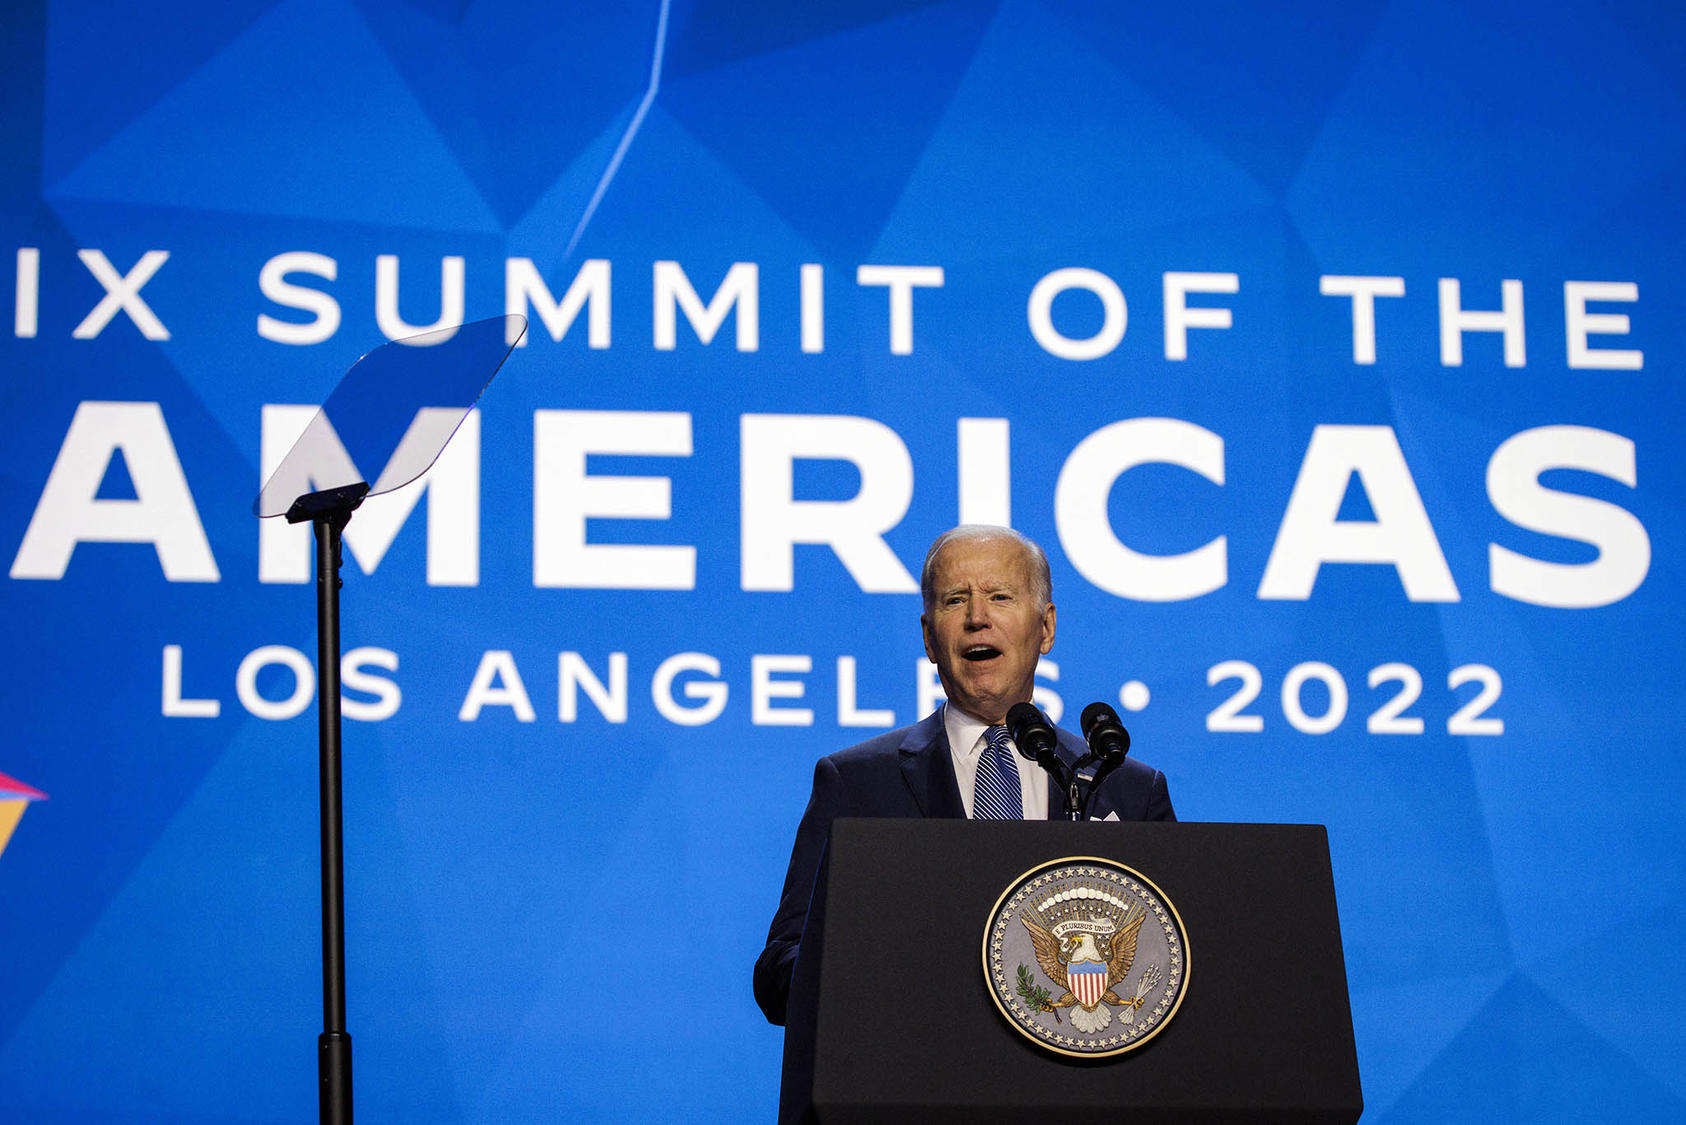 President Joe Biden speaks at the opening ceremony at the Summit of the Americas in Los Angeles. June 8, 2022. (Samuel Corum/The New York Times)